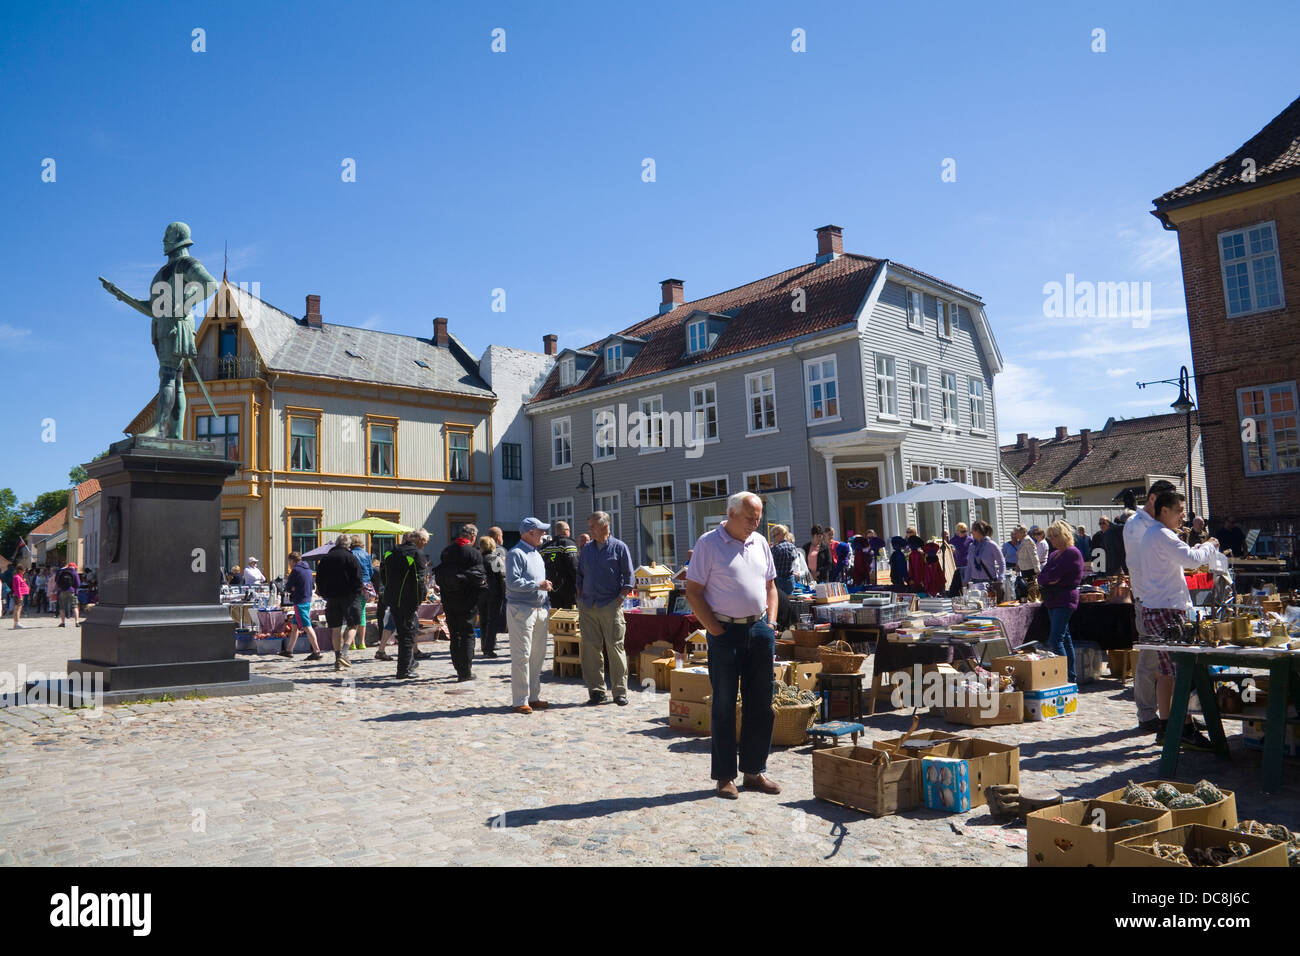 Gamlebyen Fredrikstad Ostfold Norway  Customers viewing stalls at market in Historic Torvet central square old fortified city Stock Photo